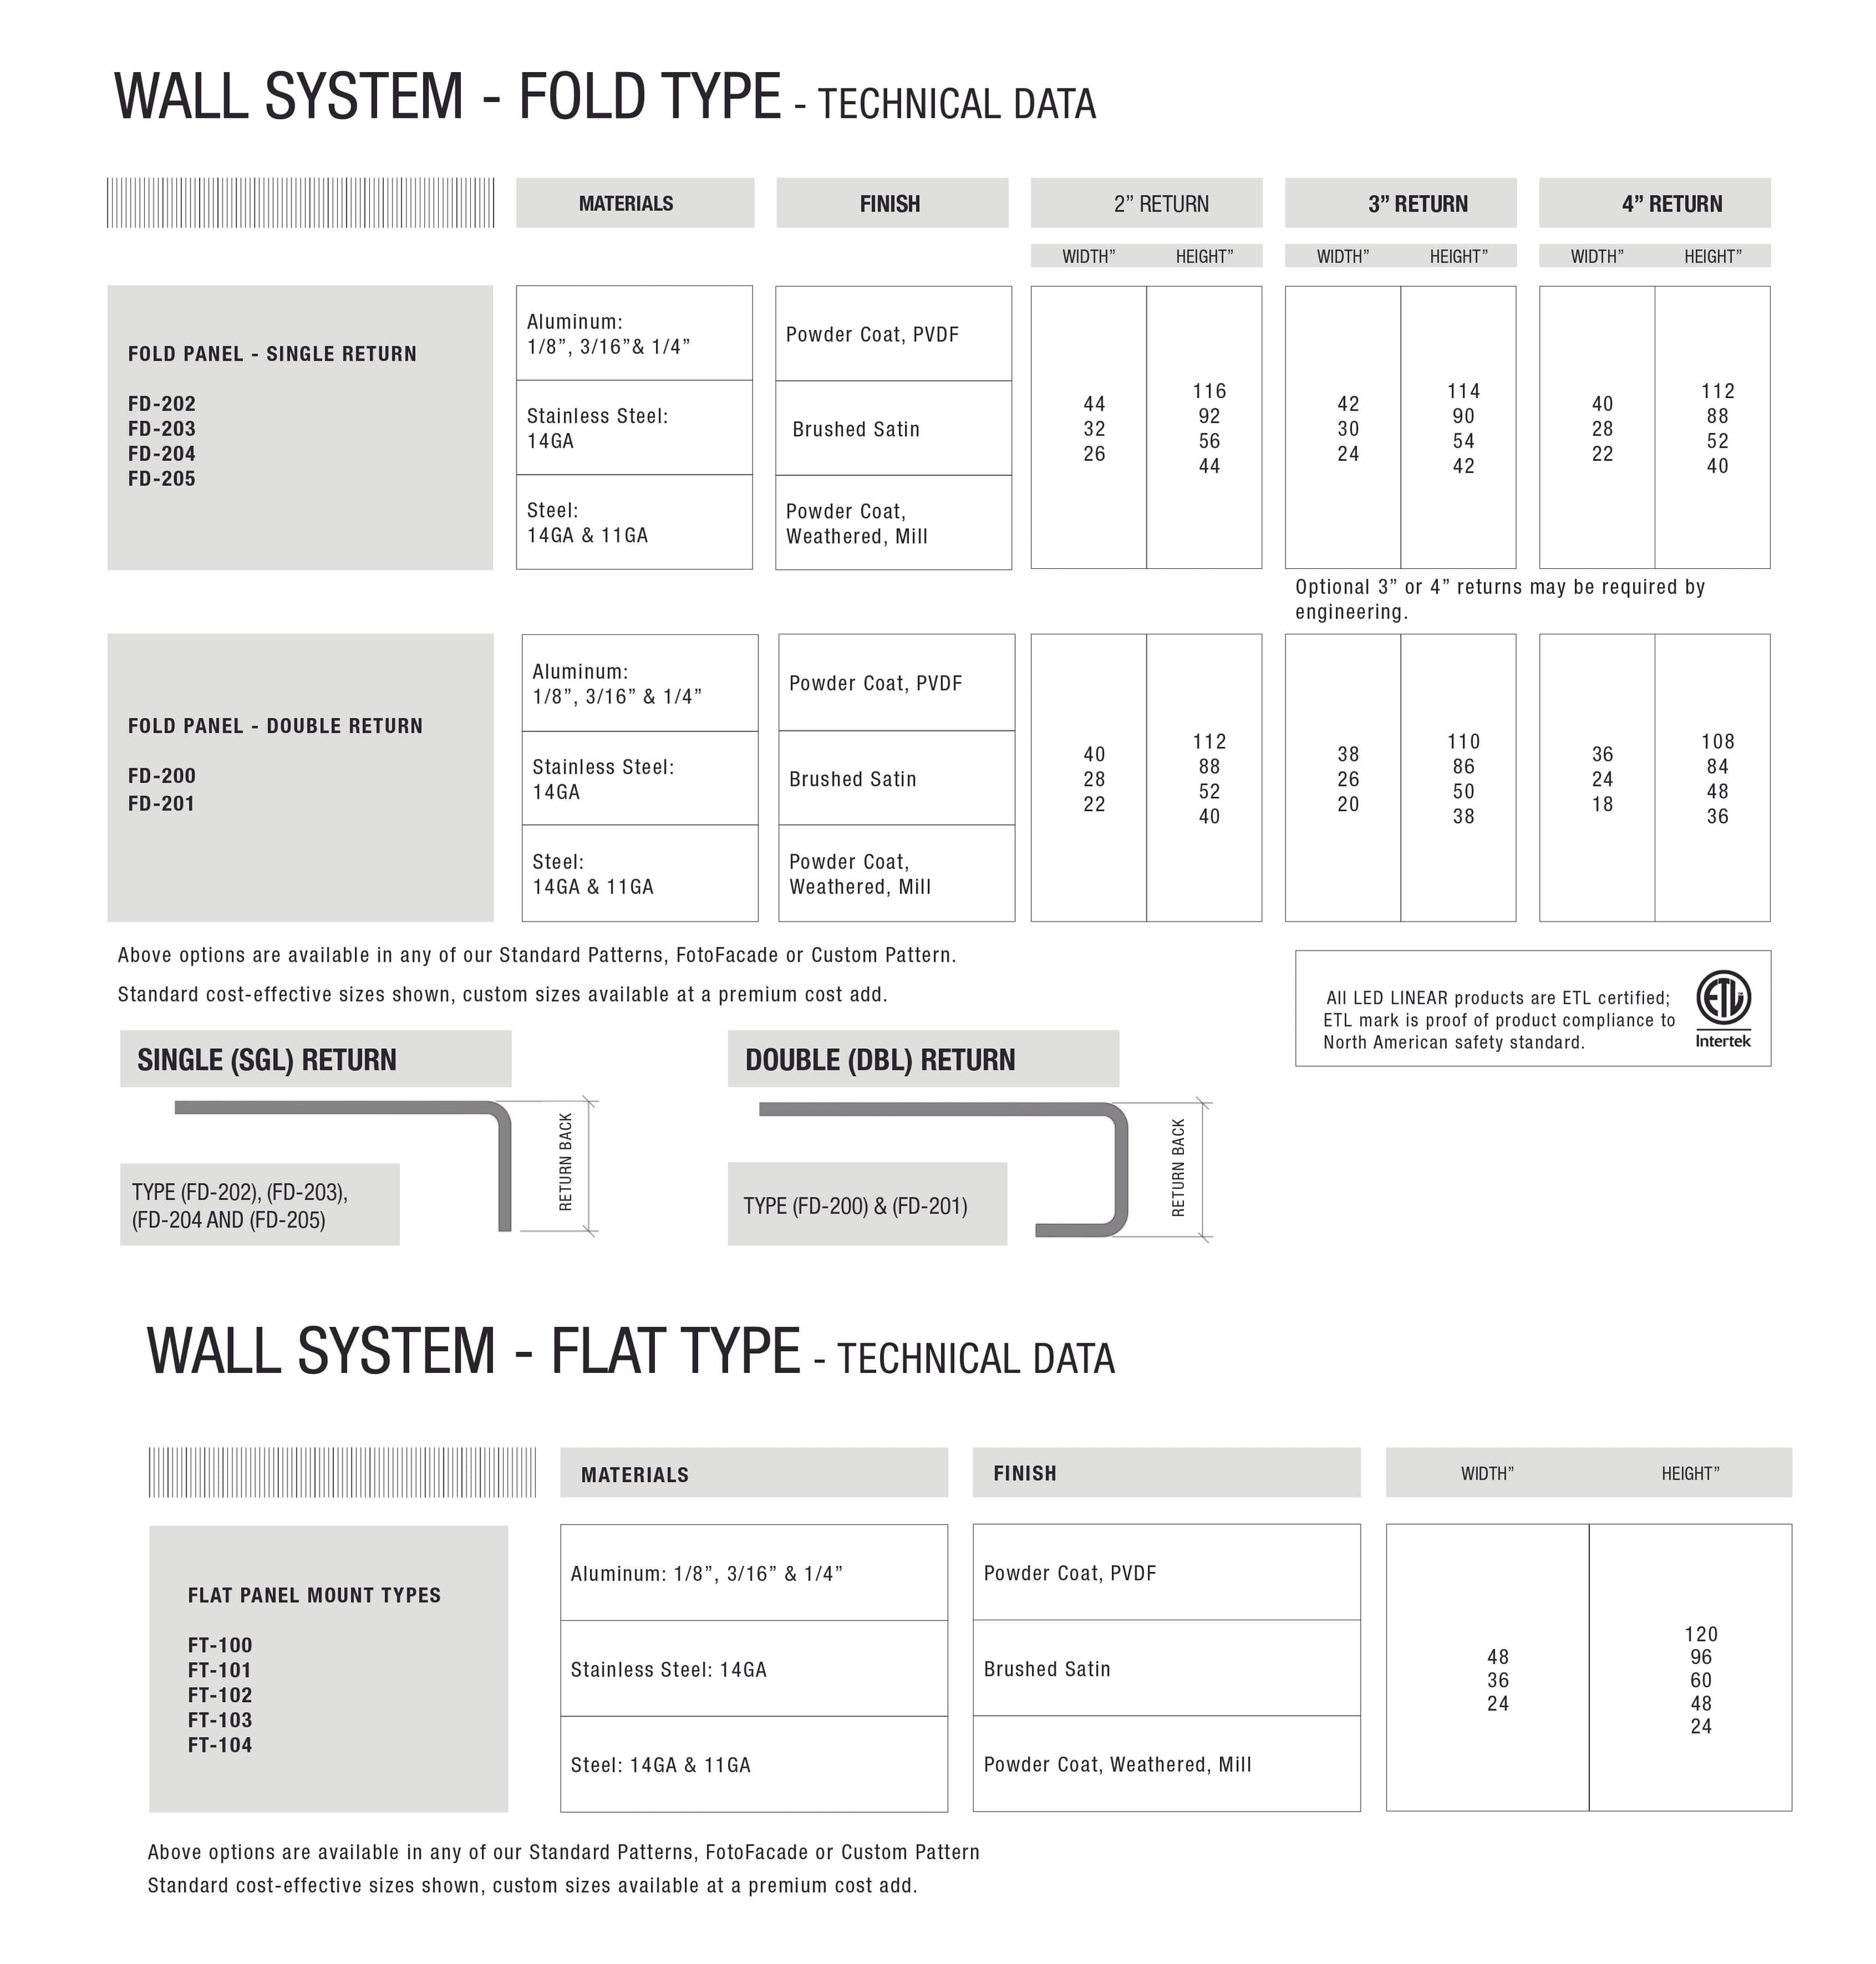 WALL SYSTEMS FLAT AND FOLD TYPE METALSPACES